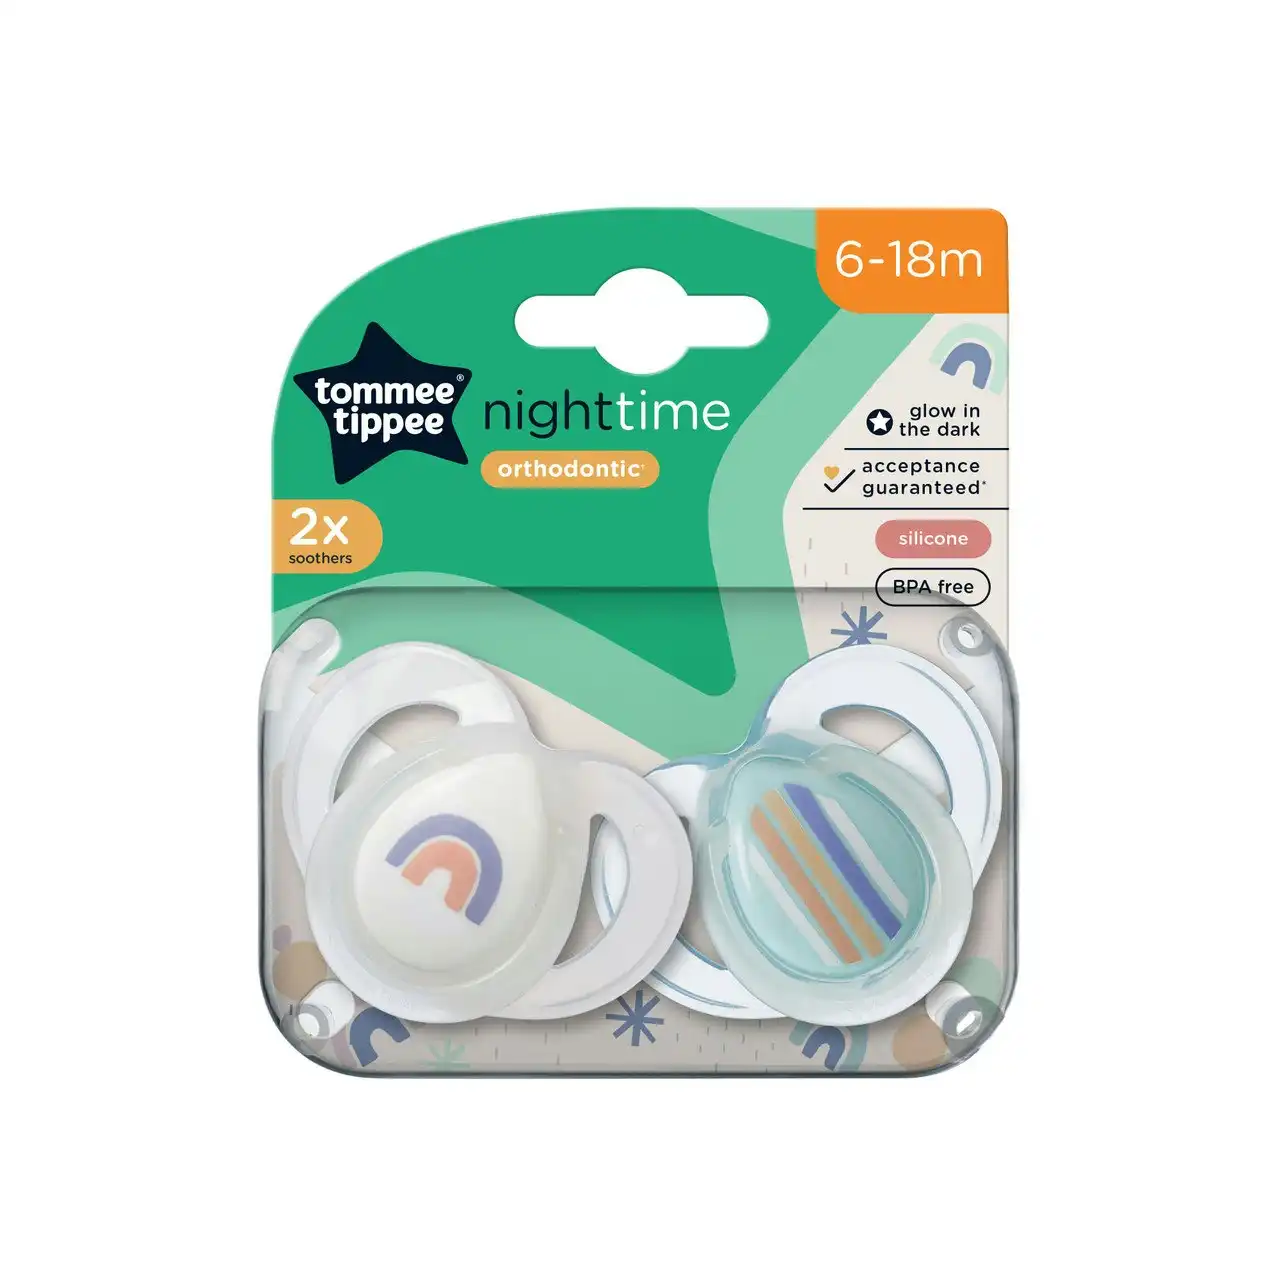 Tommee Tippee Nighttime soother, 6-18 months, 2 pack of glow in the dark soothers with reusable steriliser pod